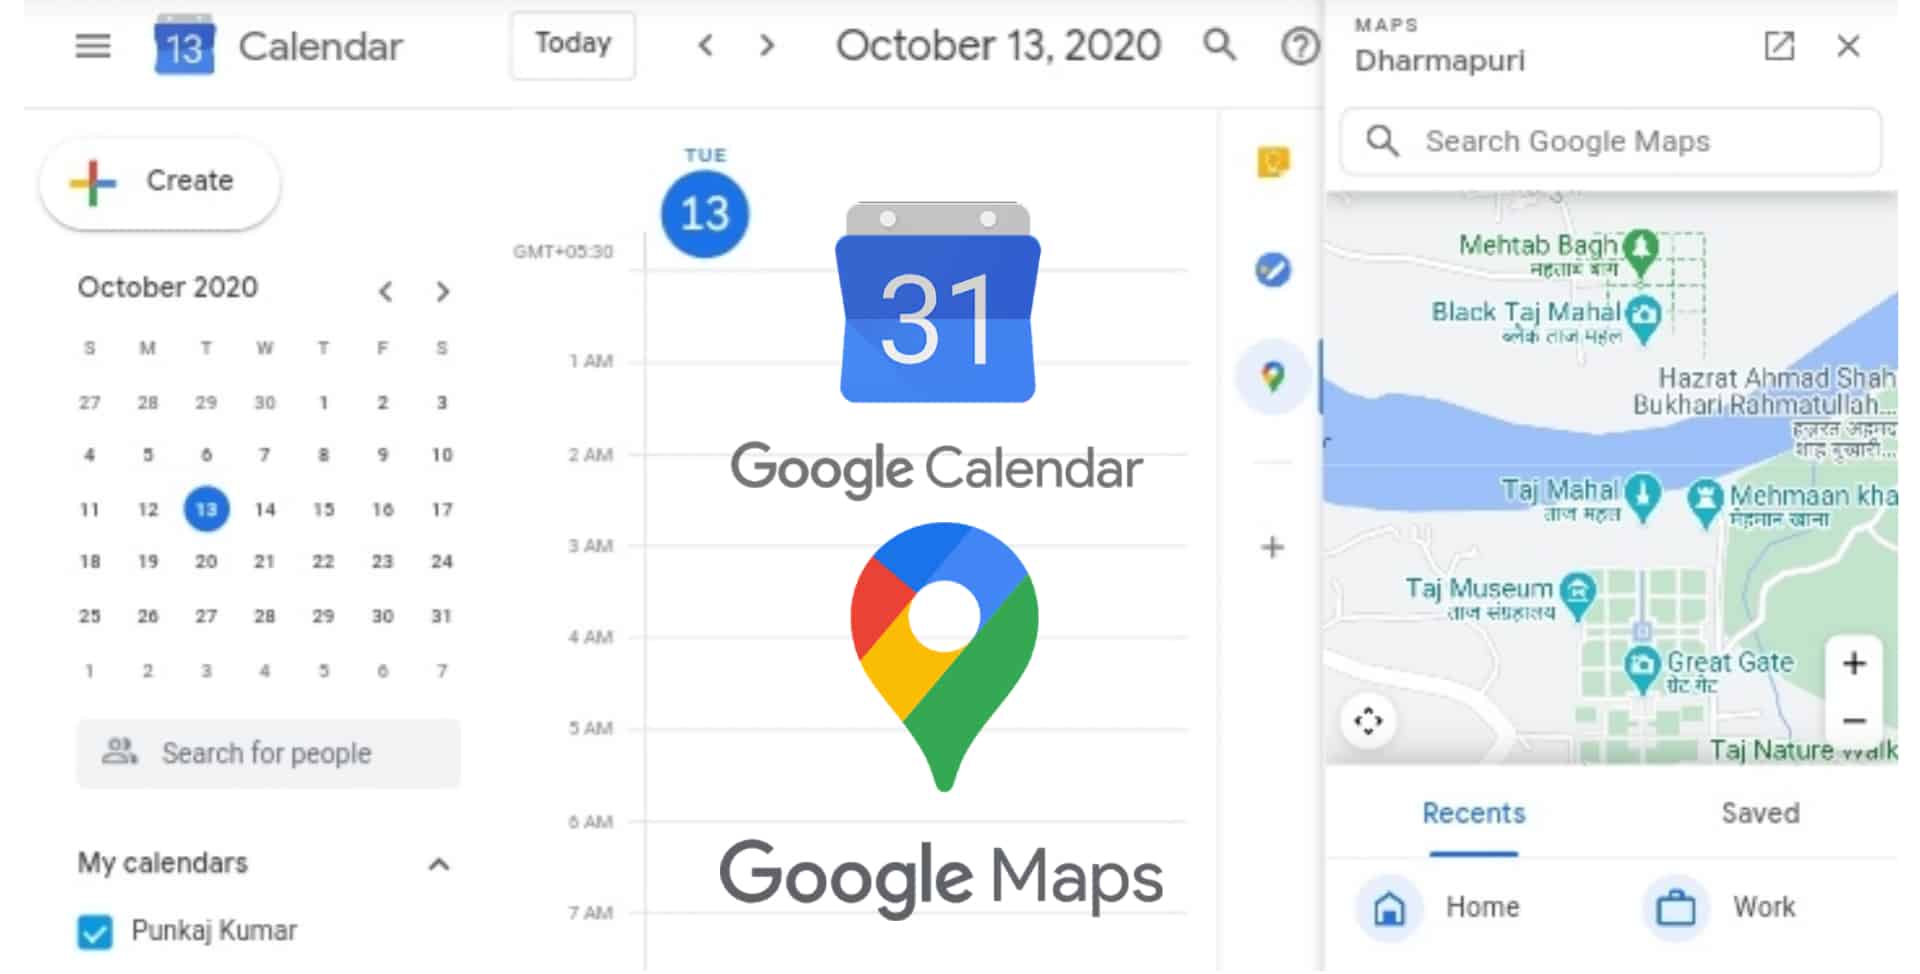 Google Calendar Side Panel Gets Google Maps Add-on For Quick Access